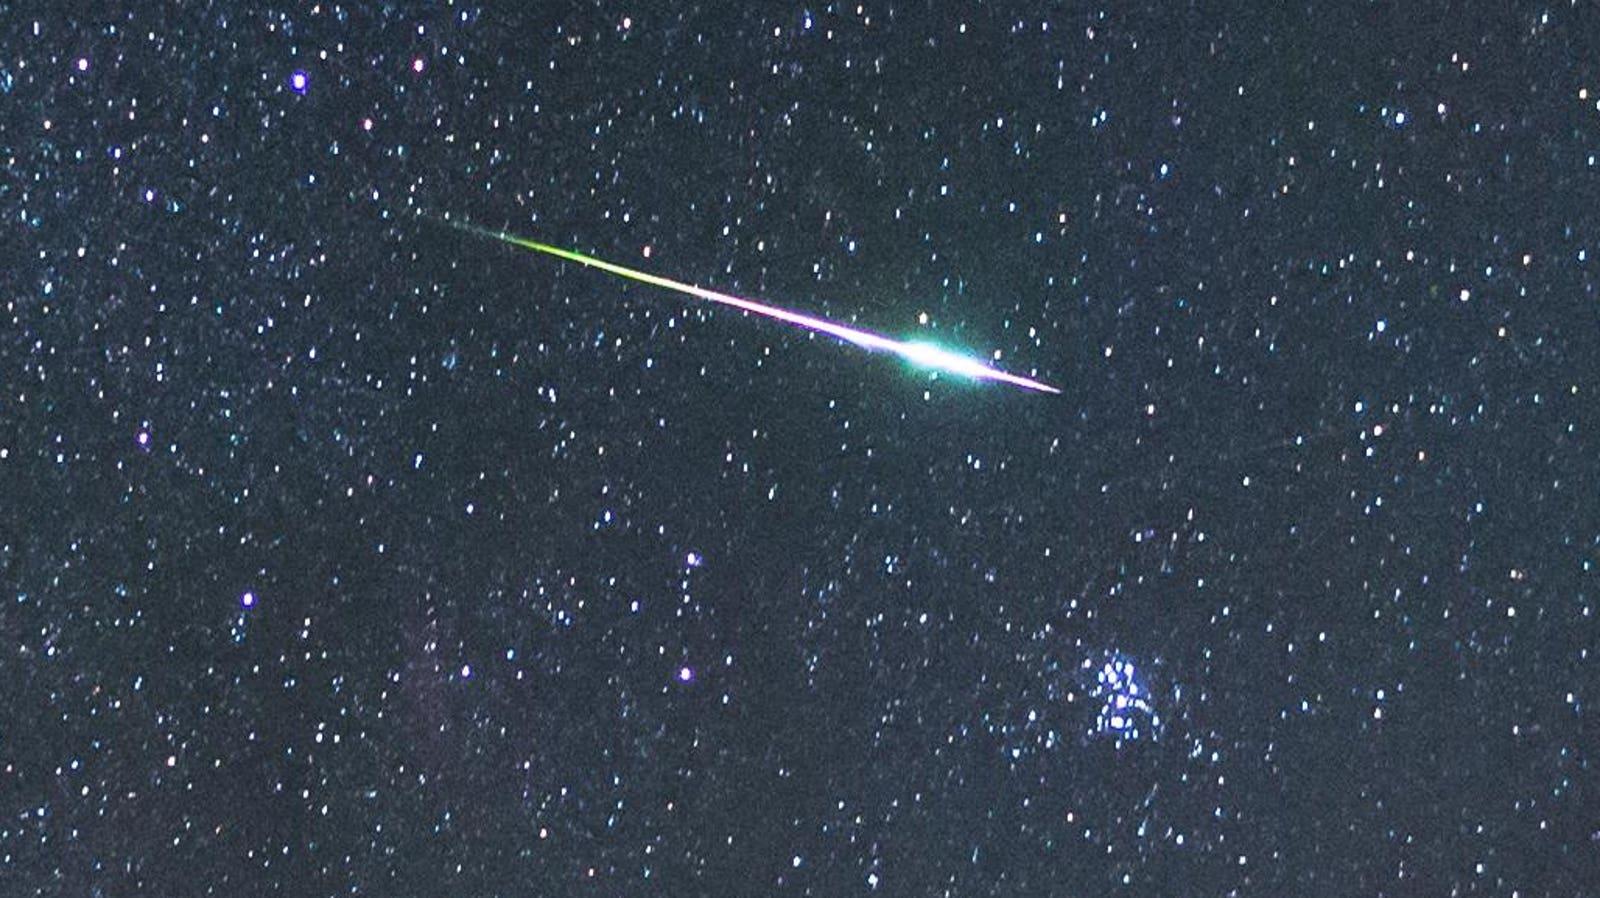 The night sky this week is being hit by a comet